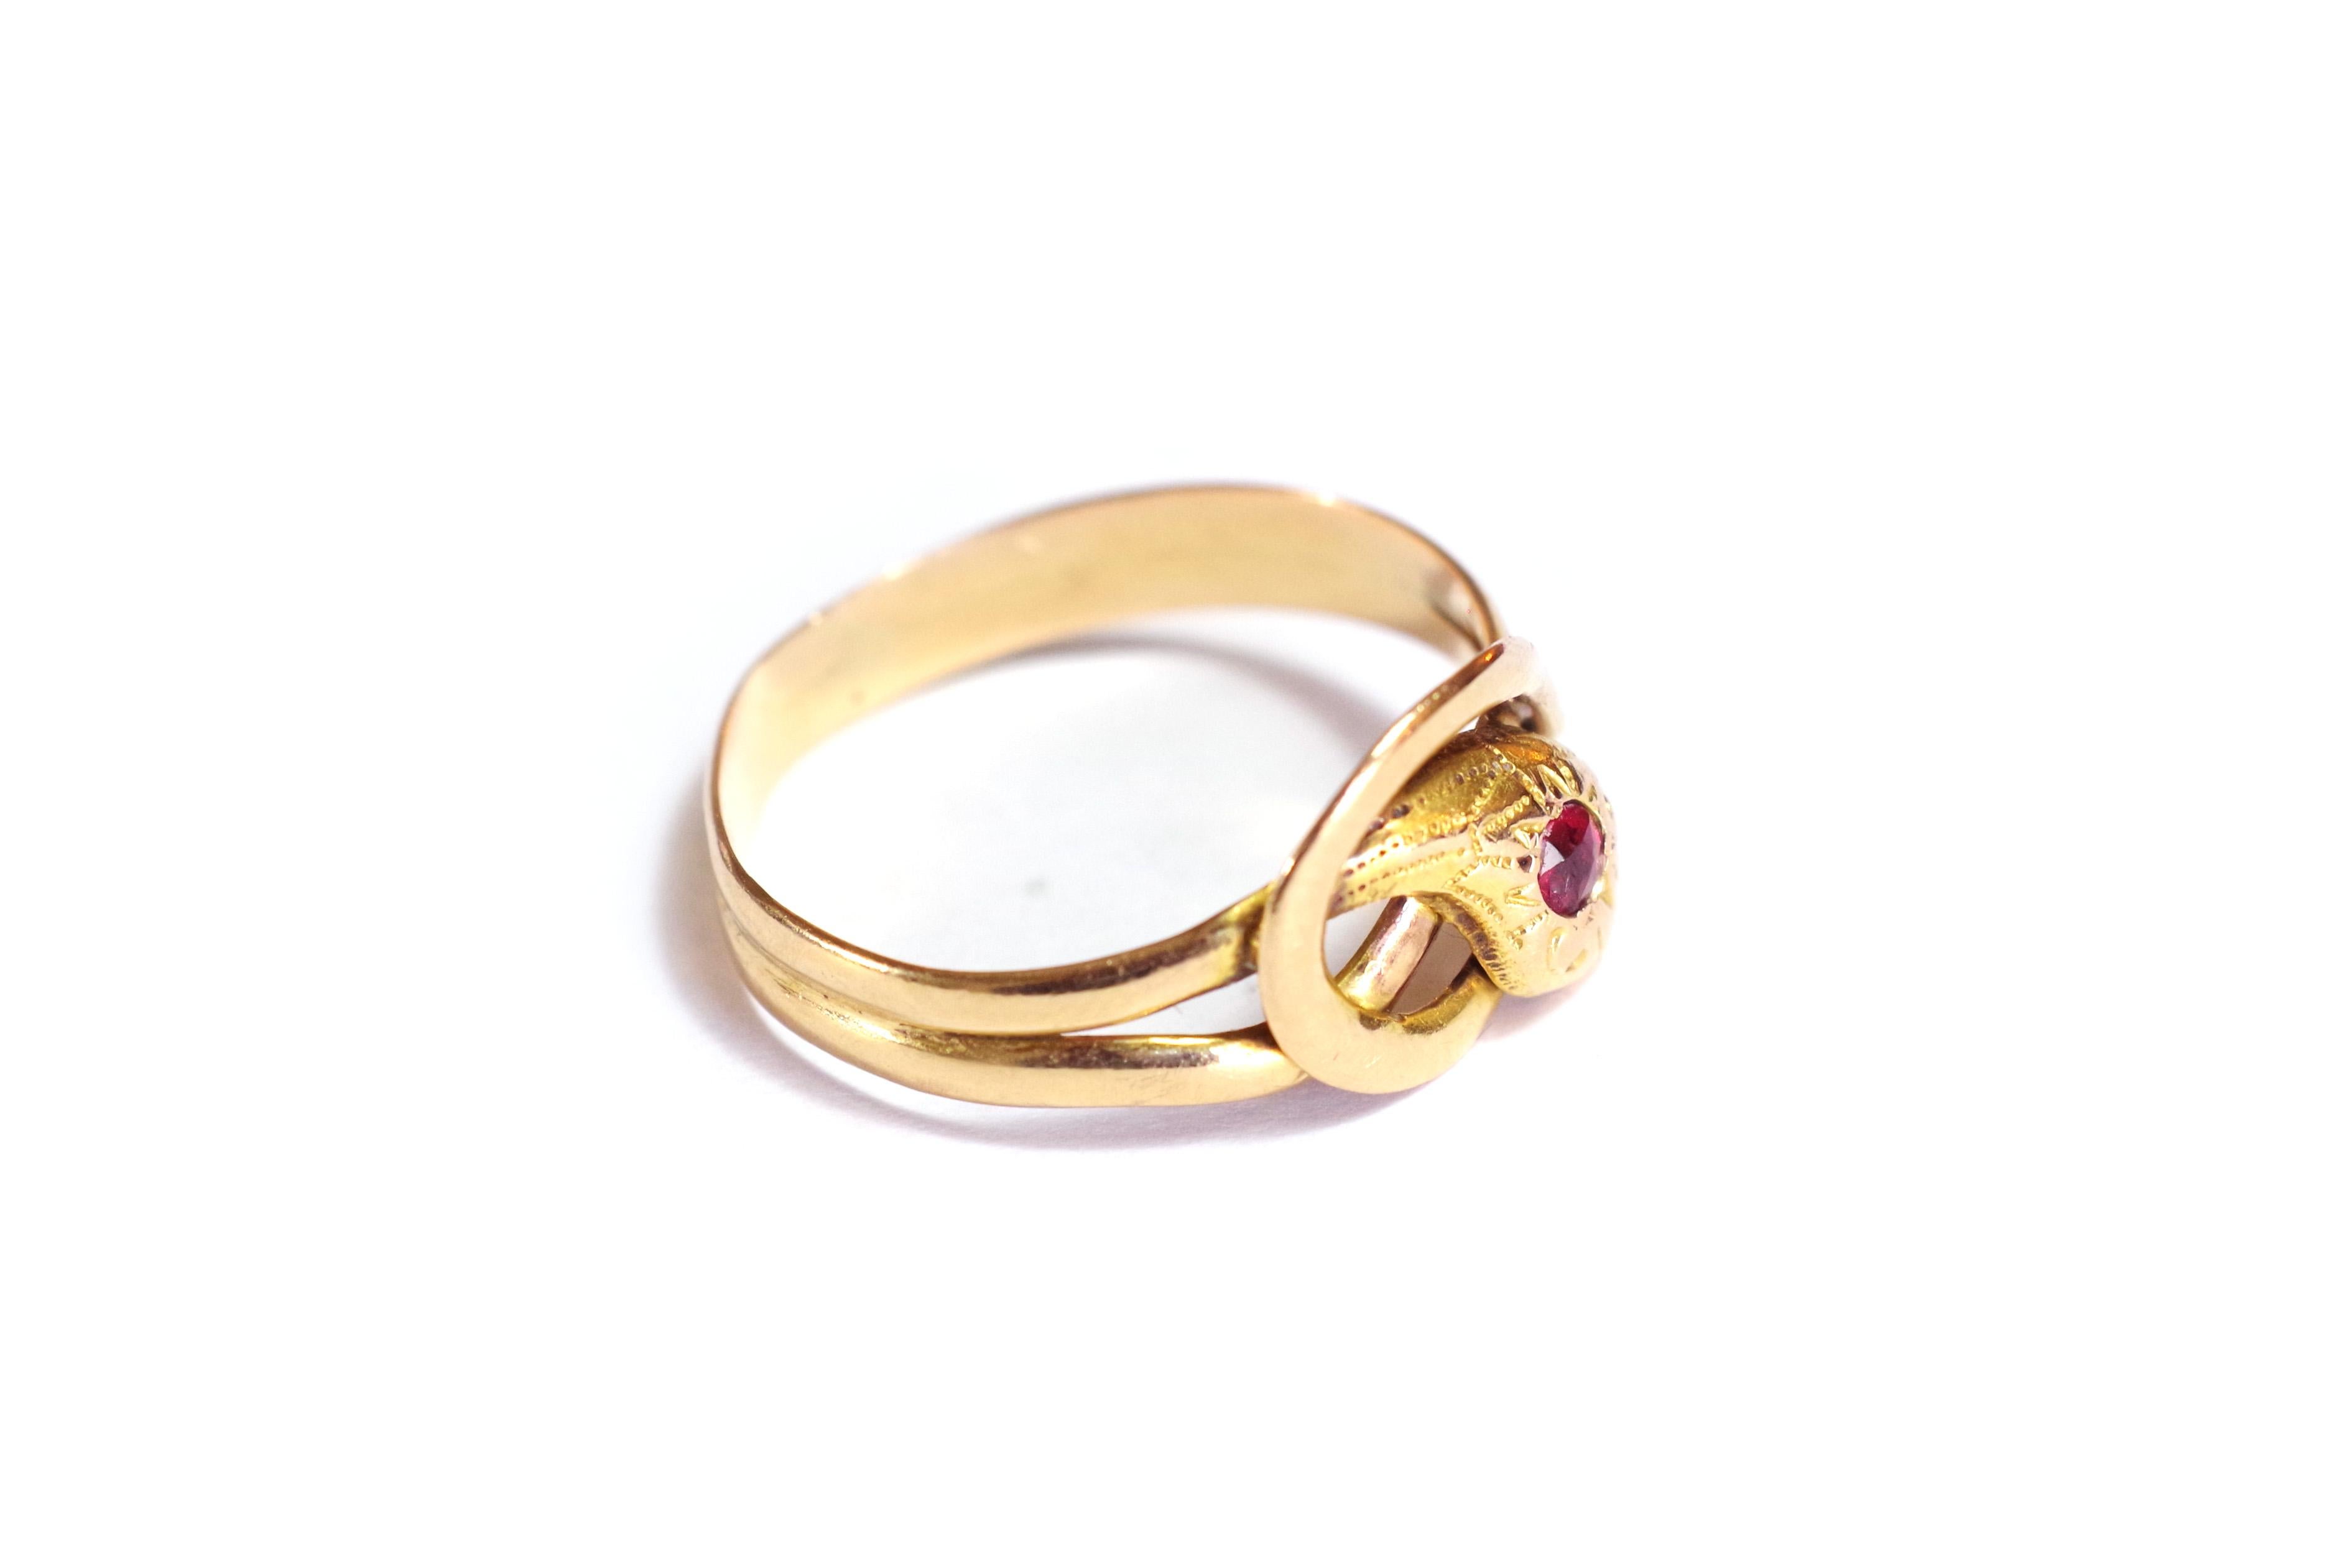 Victorian snake garnet ring in 18k yellow gold. This ring takes the form of a snake winding twice around the finger. The head of the snake is decorated with a round red garnet and delicately chiselled with patterns. It rests on the two rows formed